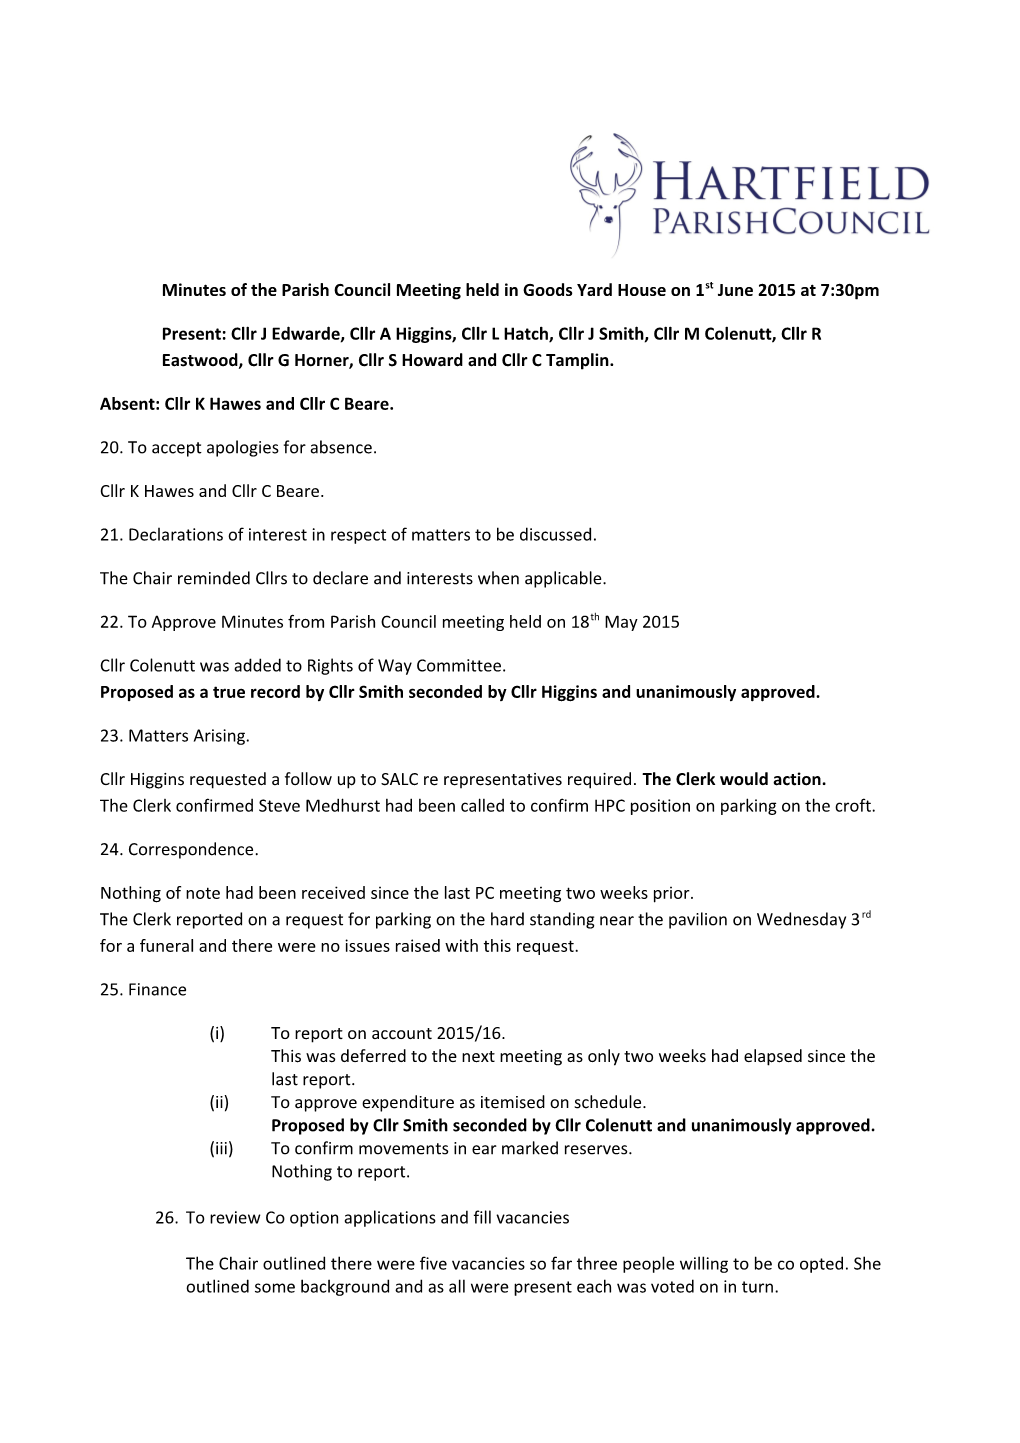 Minutes of the Parish Council Meeting Held in Goods Yard House on 1St June 2015 at 7:30Pm